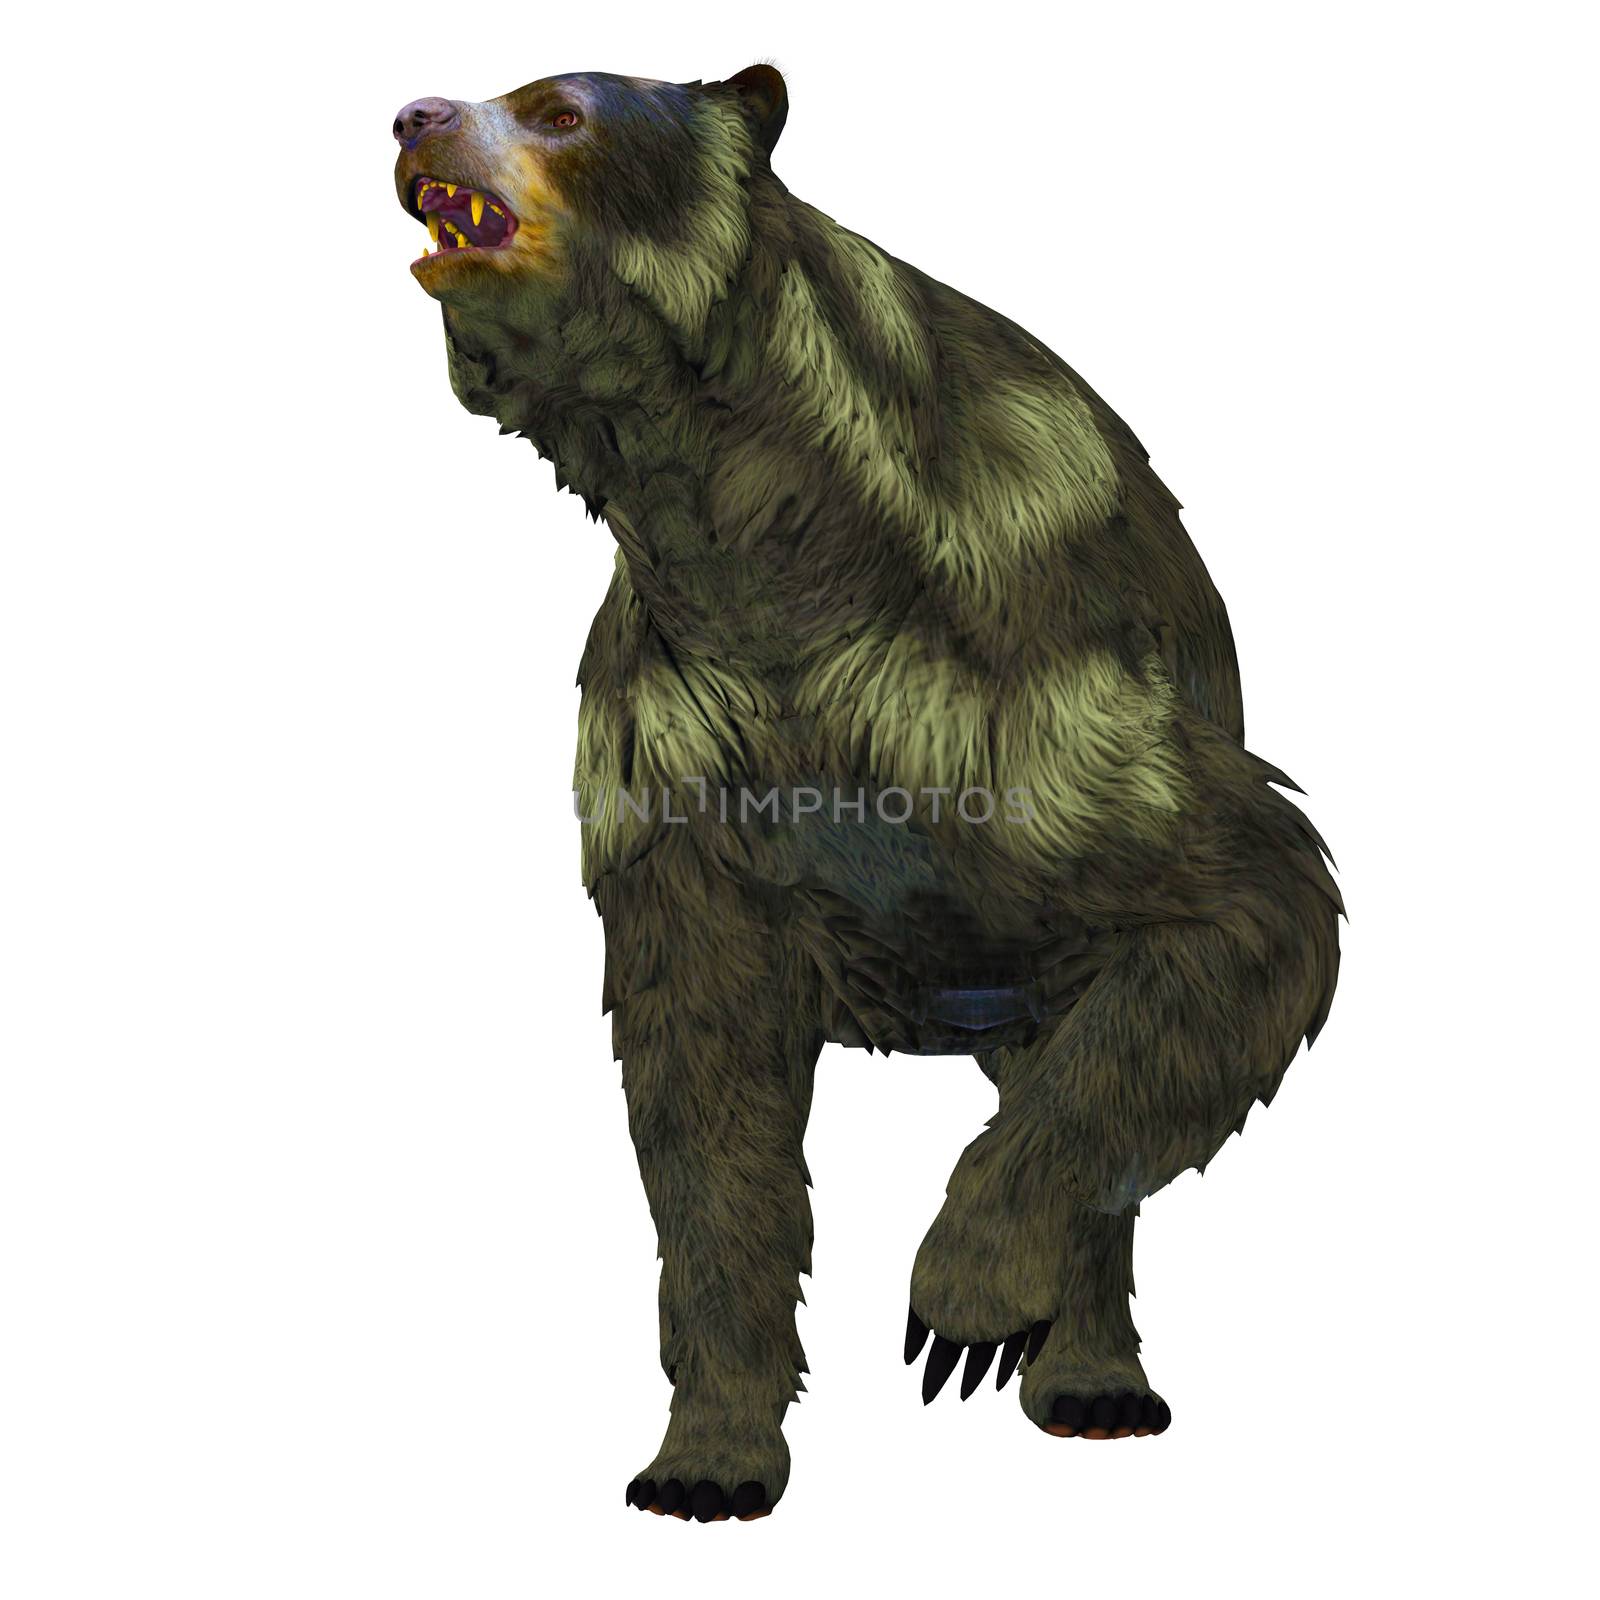 Arctodus or Short-faced Bear is an extinct mammal that lived in North America in the Pleistocene Age.